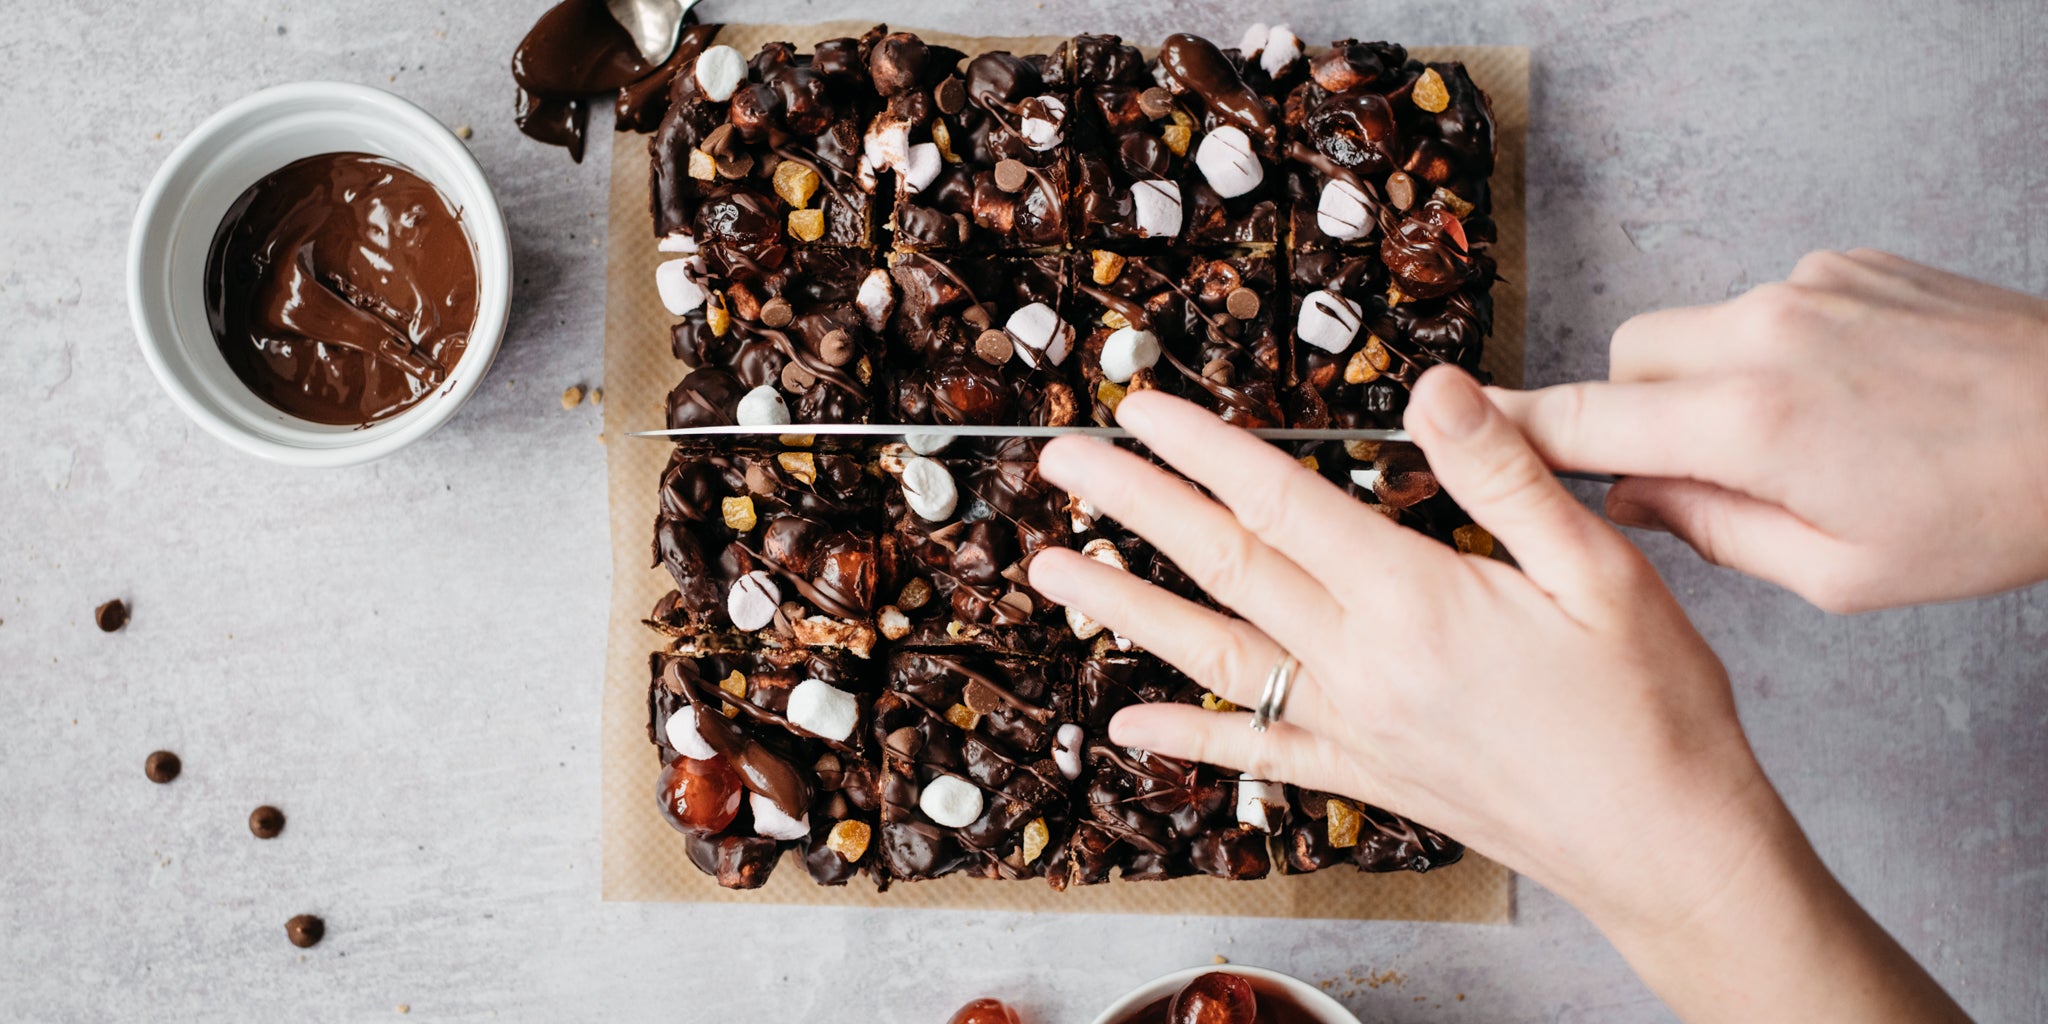 Vegan Rocky Road traybake being sliced into squares with hands holding a knife, next to a bowl of melted chocolate